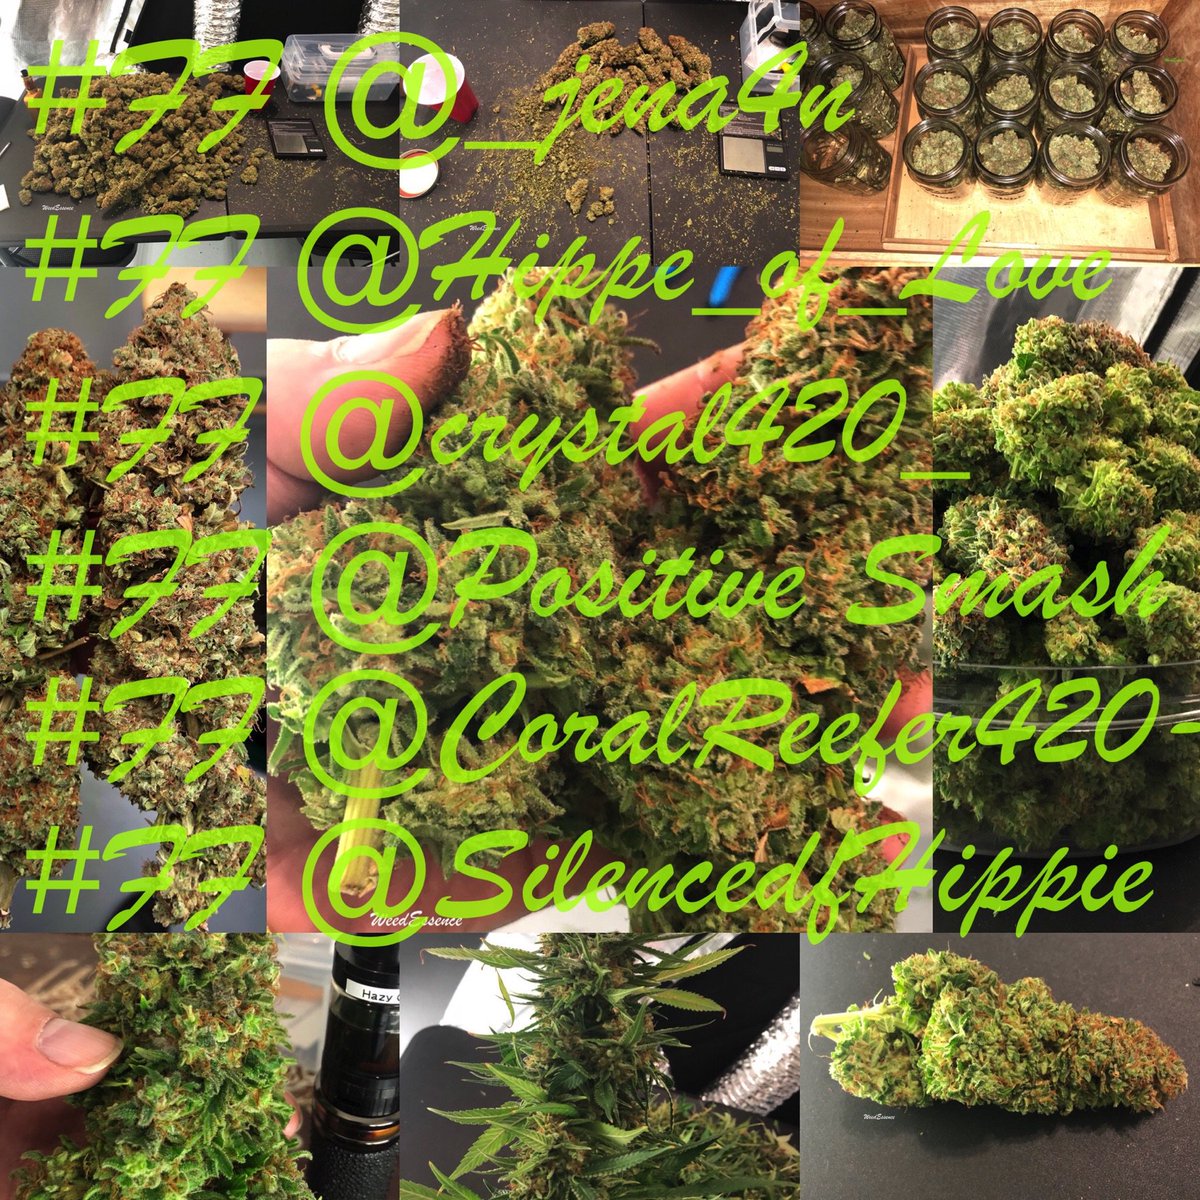 #FF 
@_jena4n
@Hippie_of_Love
@crystal420_
@CoralReefer420
@SilencedHippie

We all know #StonerGals rule 🌿💨💨😍
None more than these five absolutely awesome #StonerChicks 🌿 If u aren’t already following … Give them a follow now. U will not be disappointed I promise‼️Cheers!